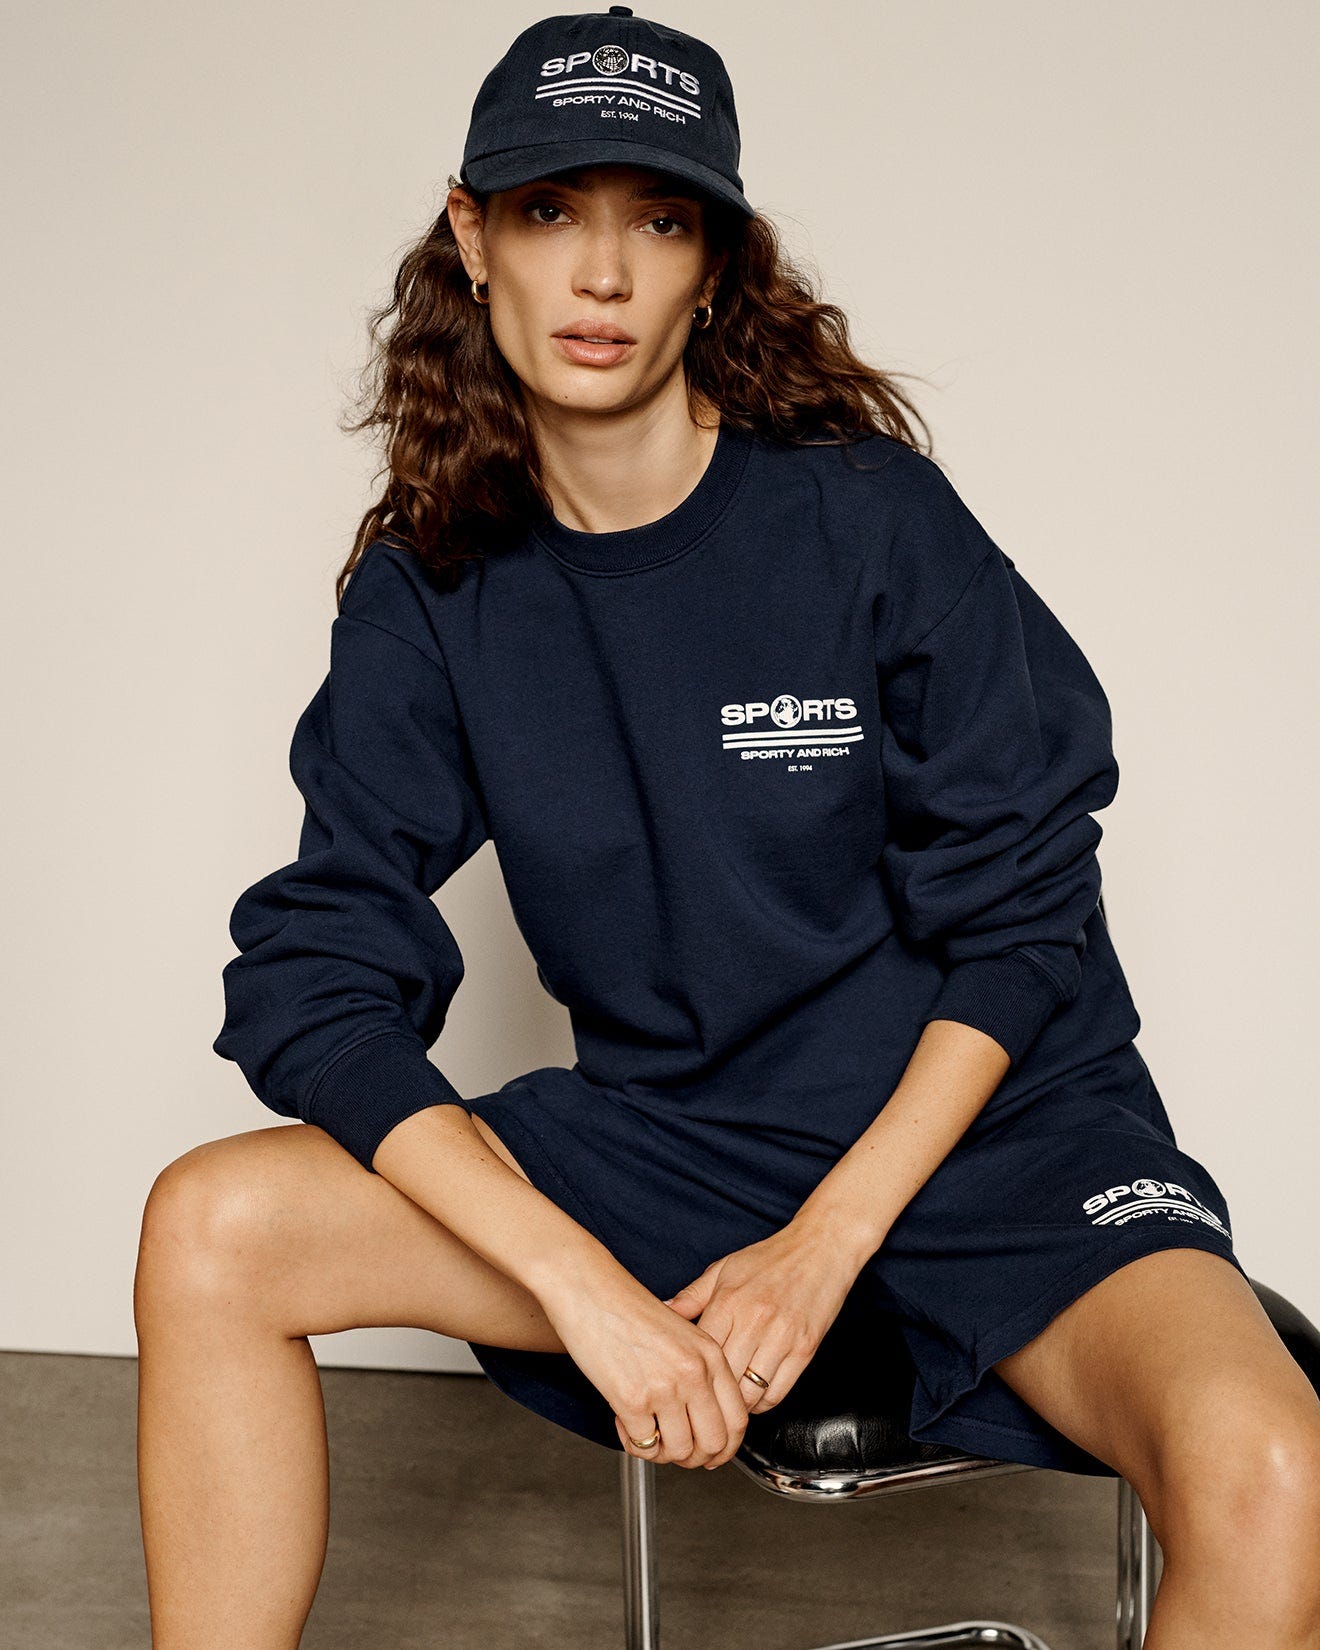 Spring/Summer 2022 Collection by Sporty & Rich